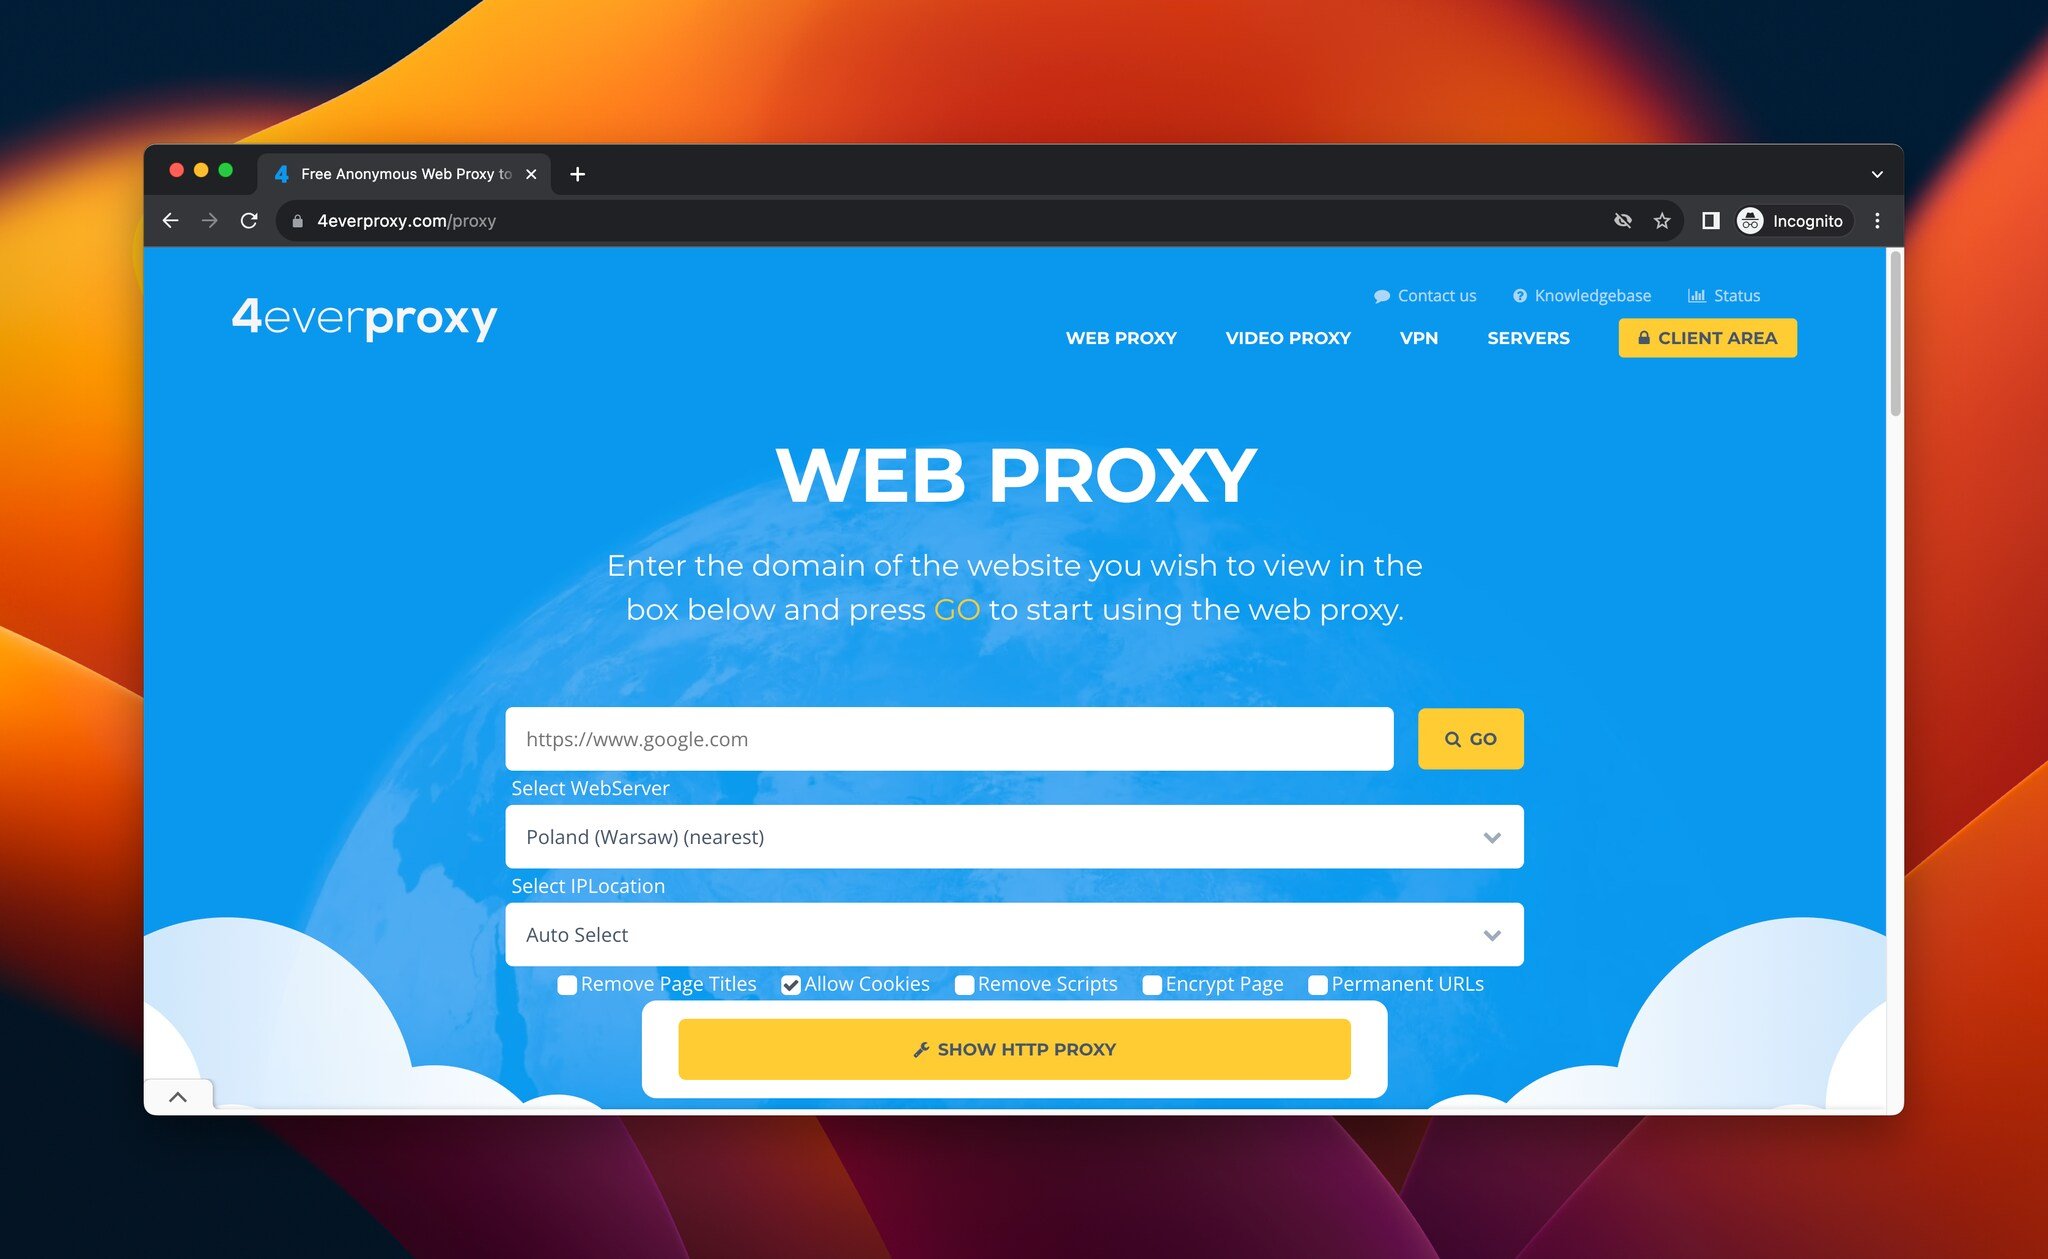 A screenshot of the landingpage of 4everproxy, which is a free web proxy